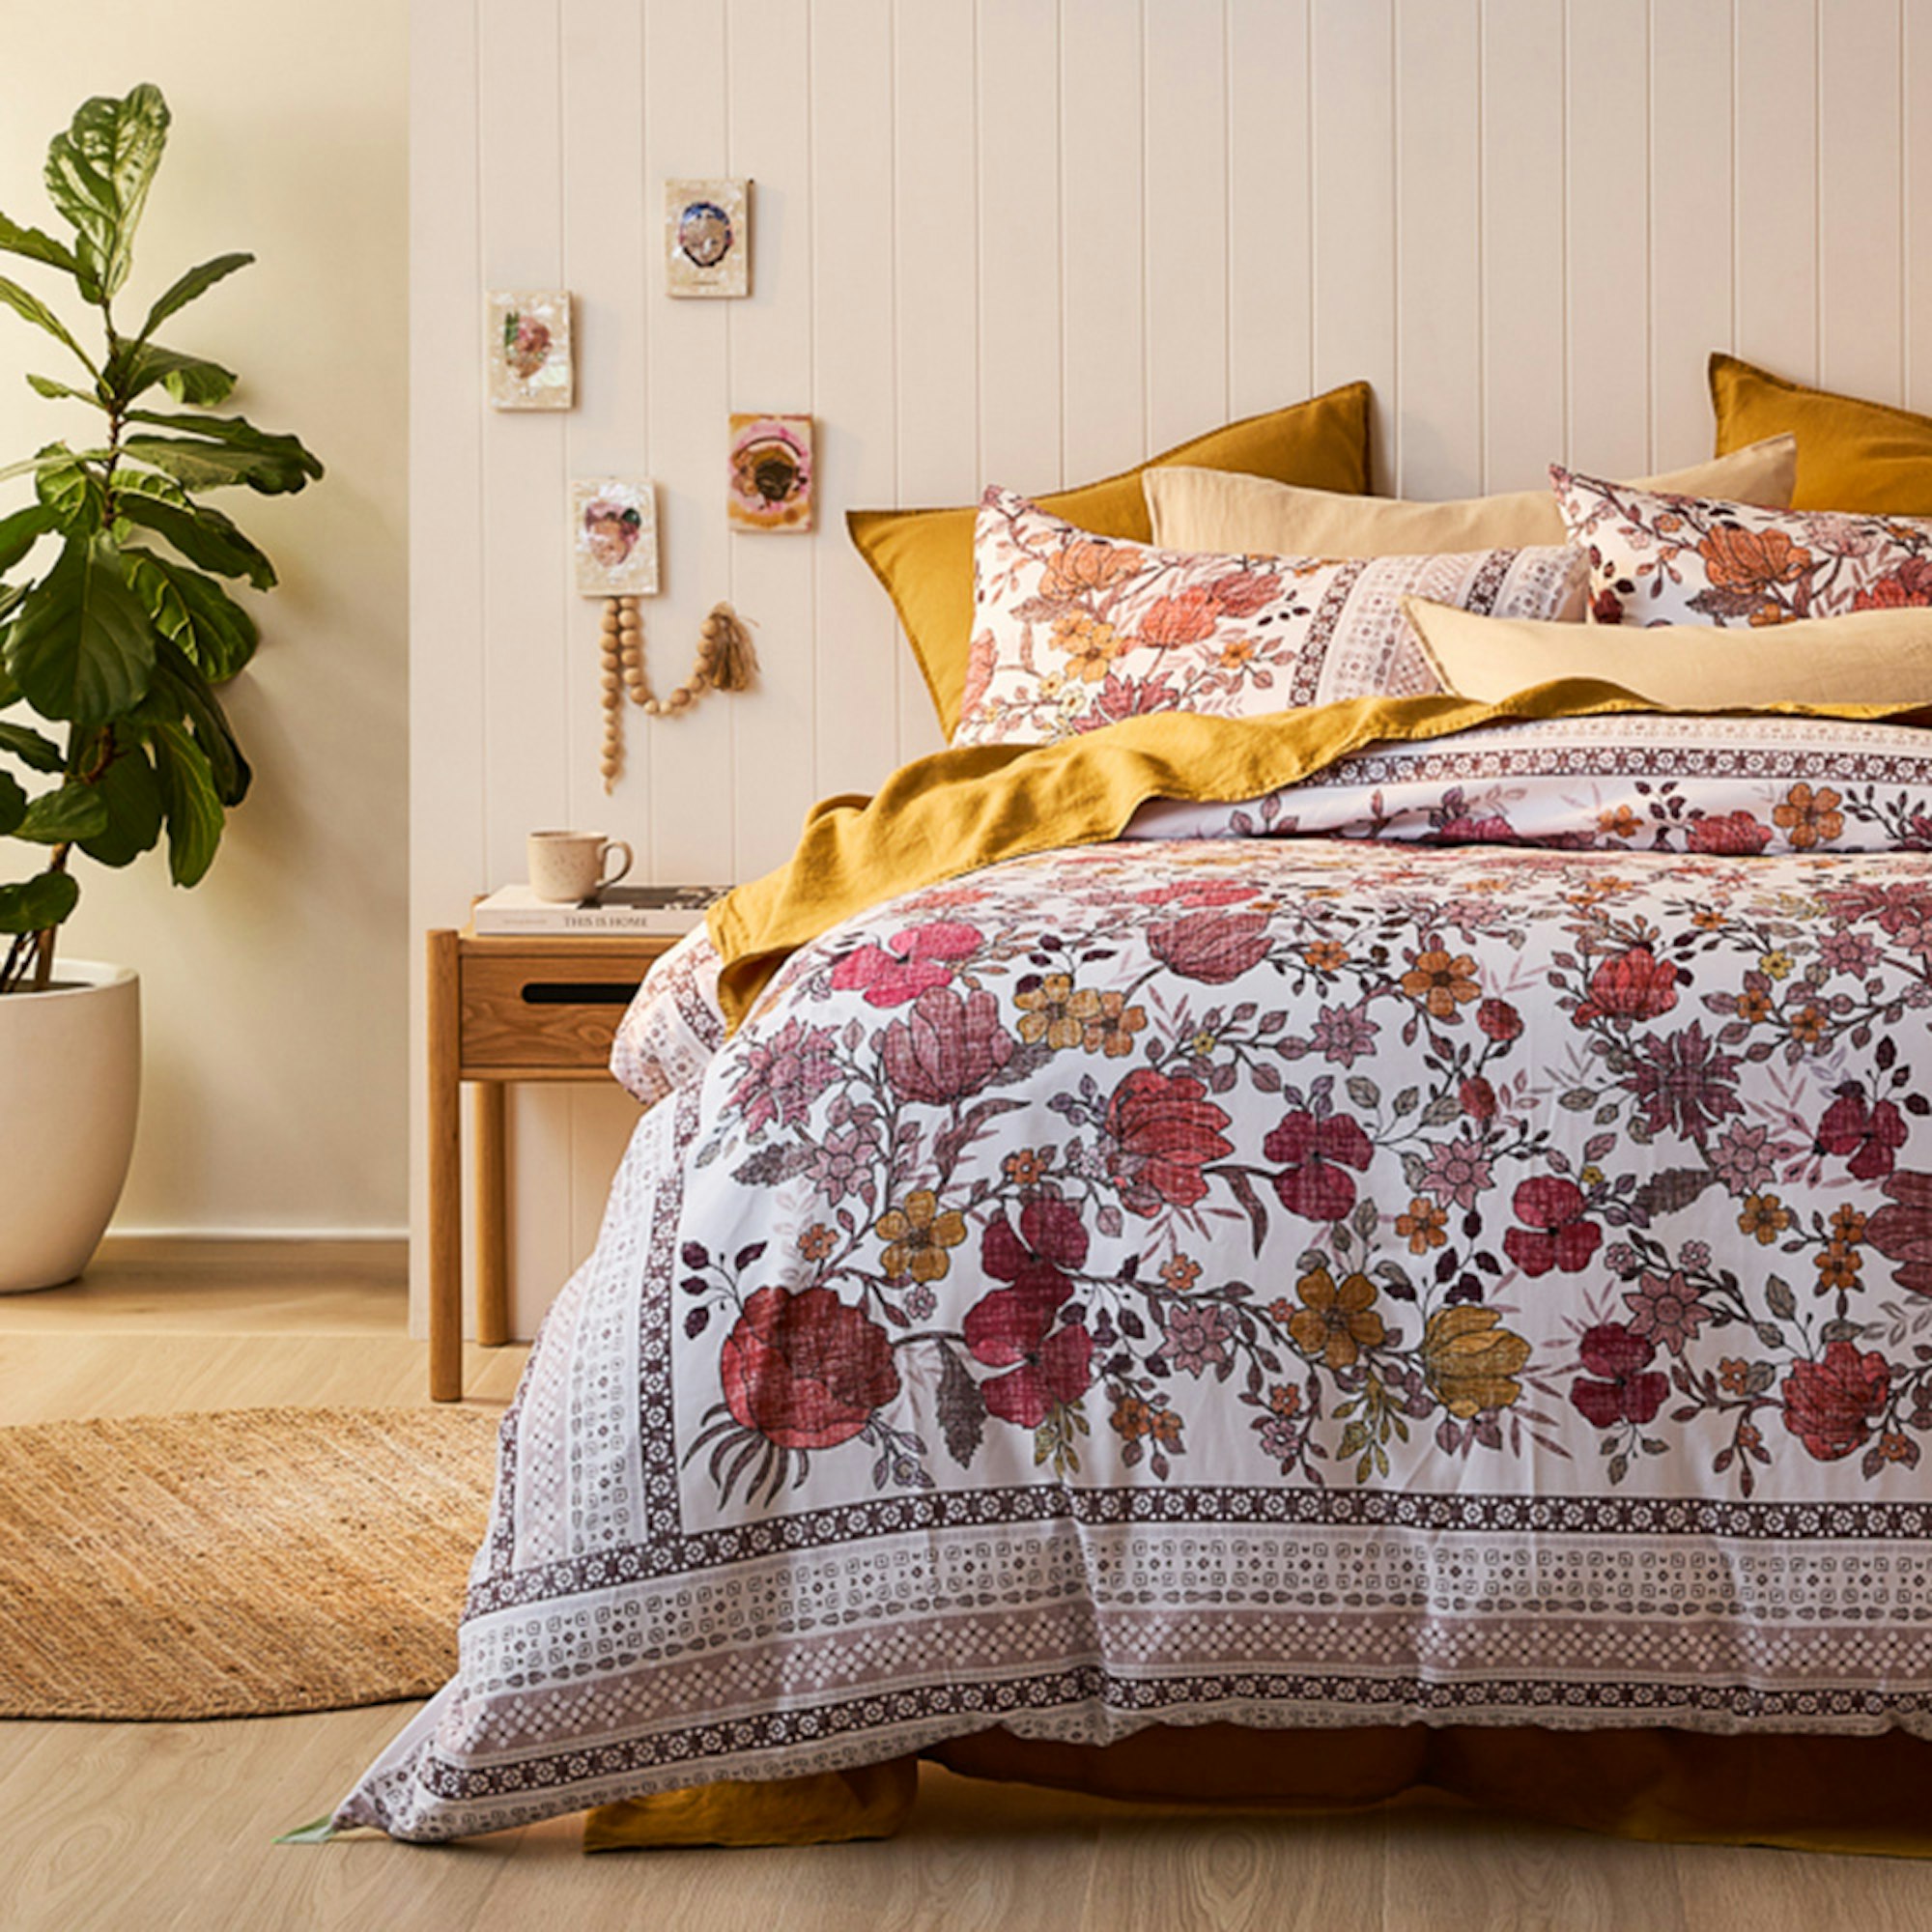 Warm low light complete bedroom setting with layered pillows, bedside table and plant